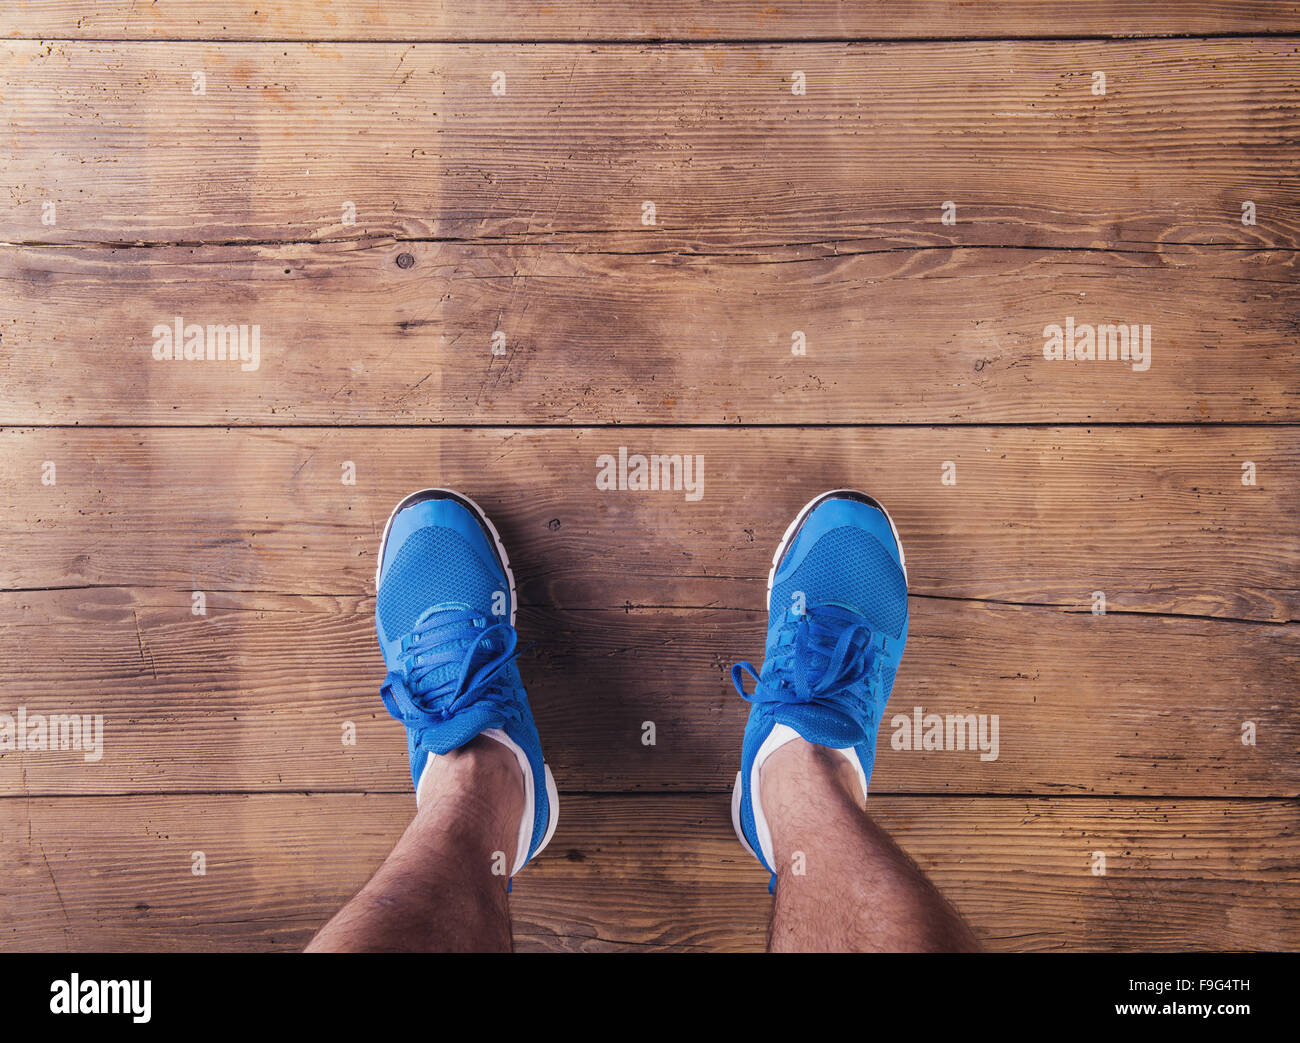 Legs of a runner on a wooden floor background Stock Photo